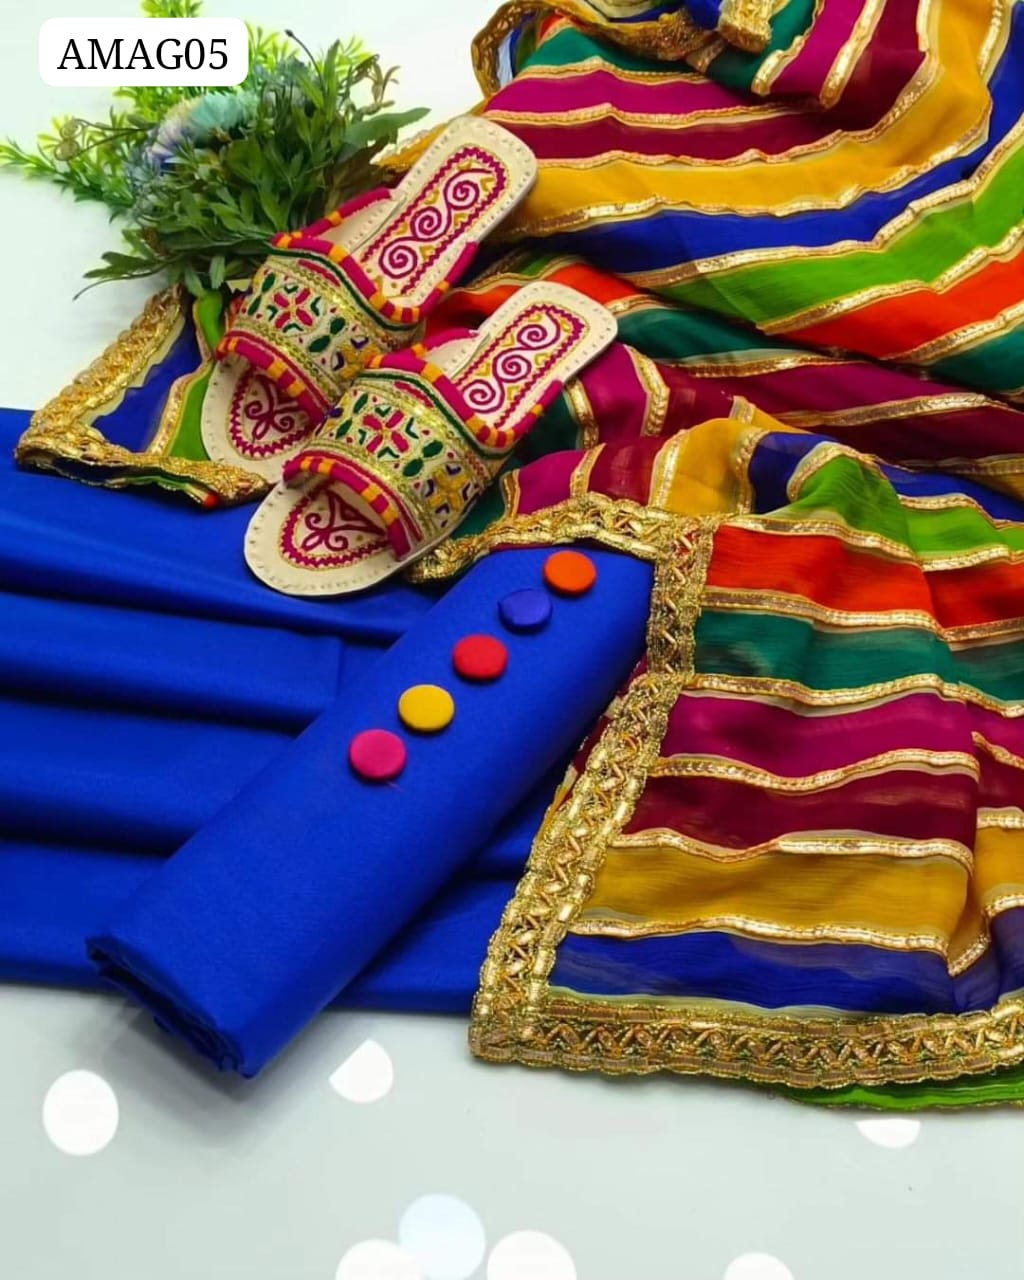 Kataan Silk Fabric Plain Shirt With Beautiful HEAVY Chiffon Jorjet Multi Linings With Gotta Lining Touch Across 4 Sided Border Duppata And Kataan Silk Plain Trouser 3Pc Dress With 5 Button & Handmade Chapal Gift